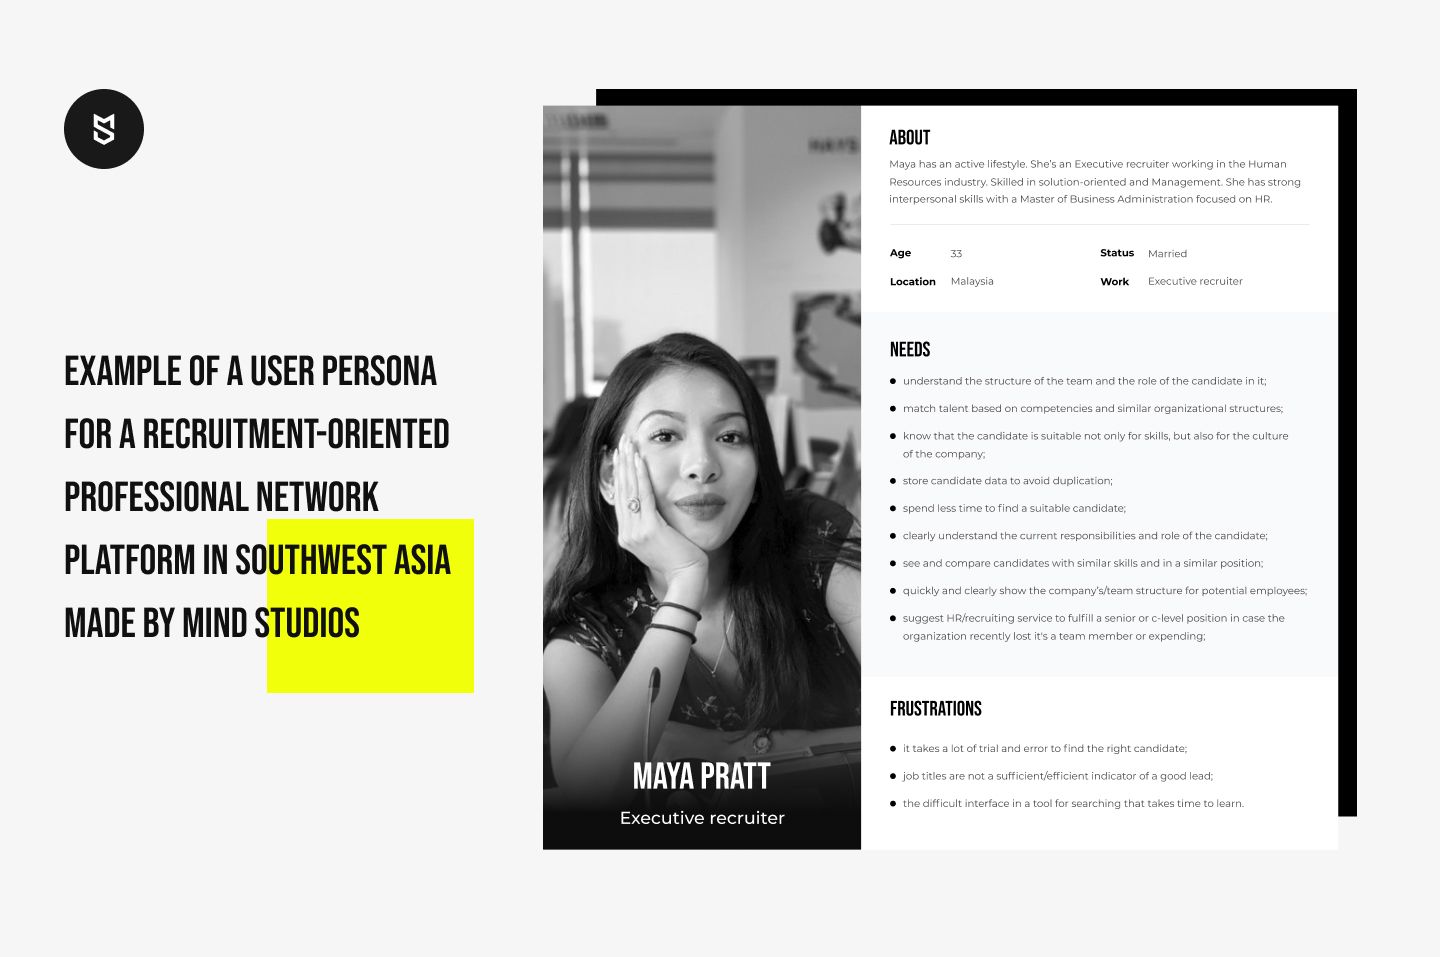 Example of a user persona for a recruitment-oriented professional network platform in Southwest Asia made by Mind Studios